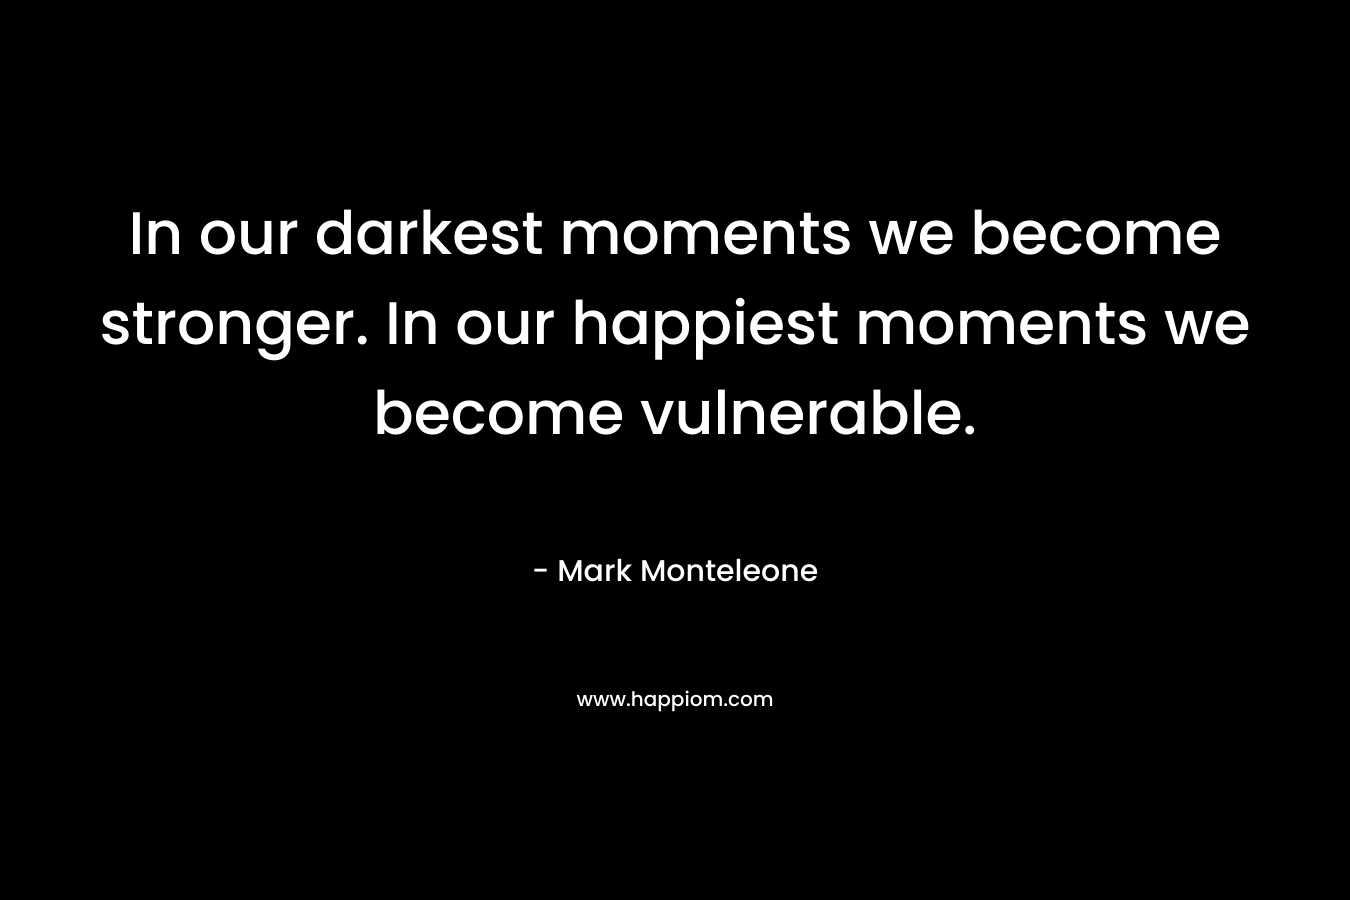 In our darkest moments we become stronger. In our happiest moments we become vulnerable.